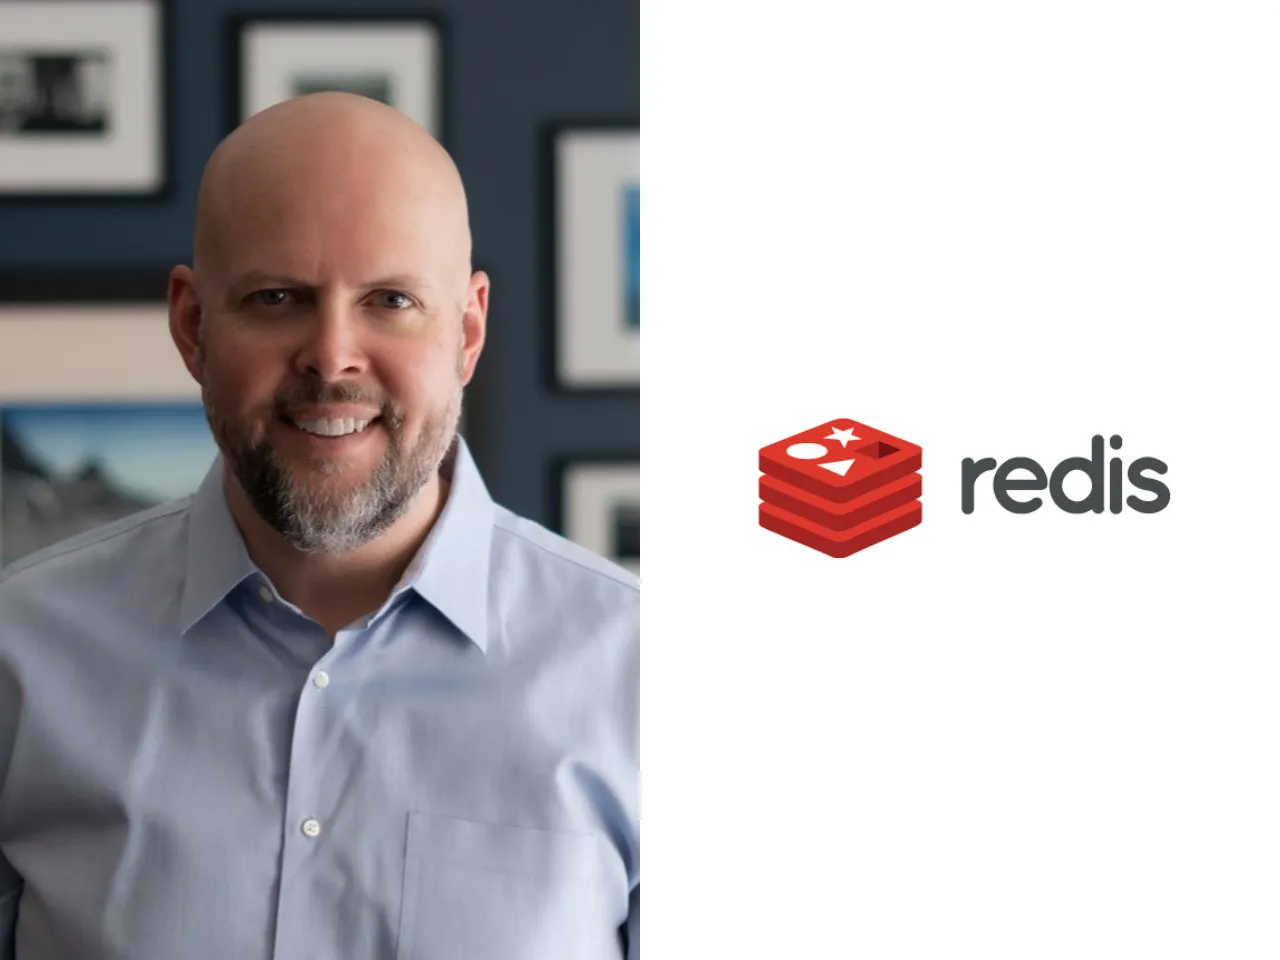 Redis appoints Tom Rabaut as Chief Customer Officer